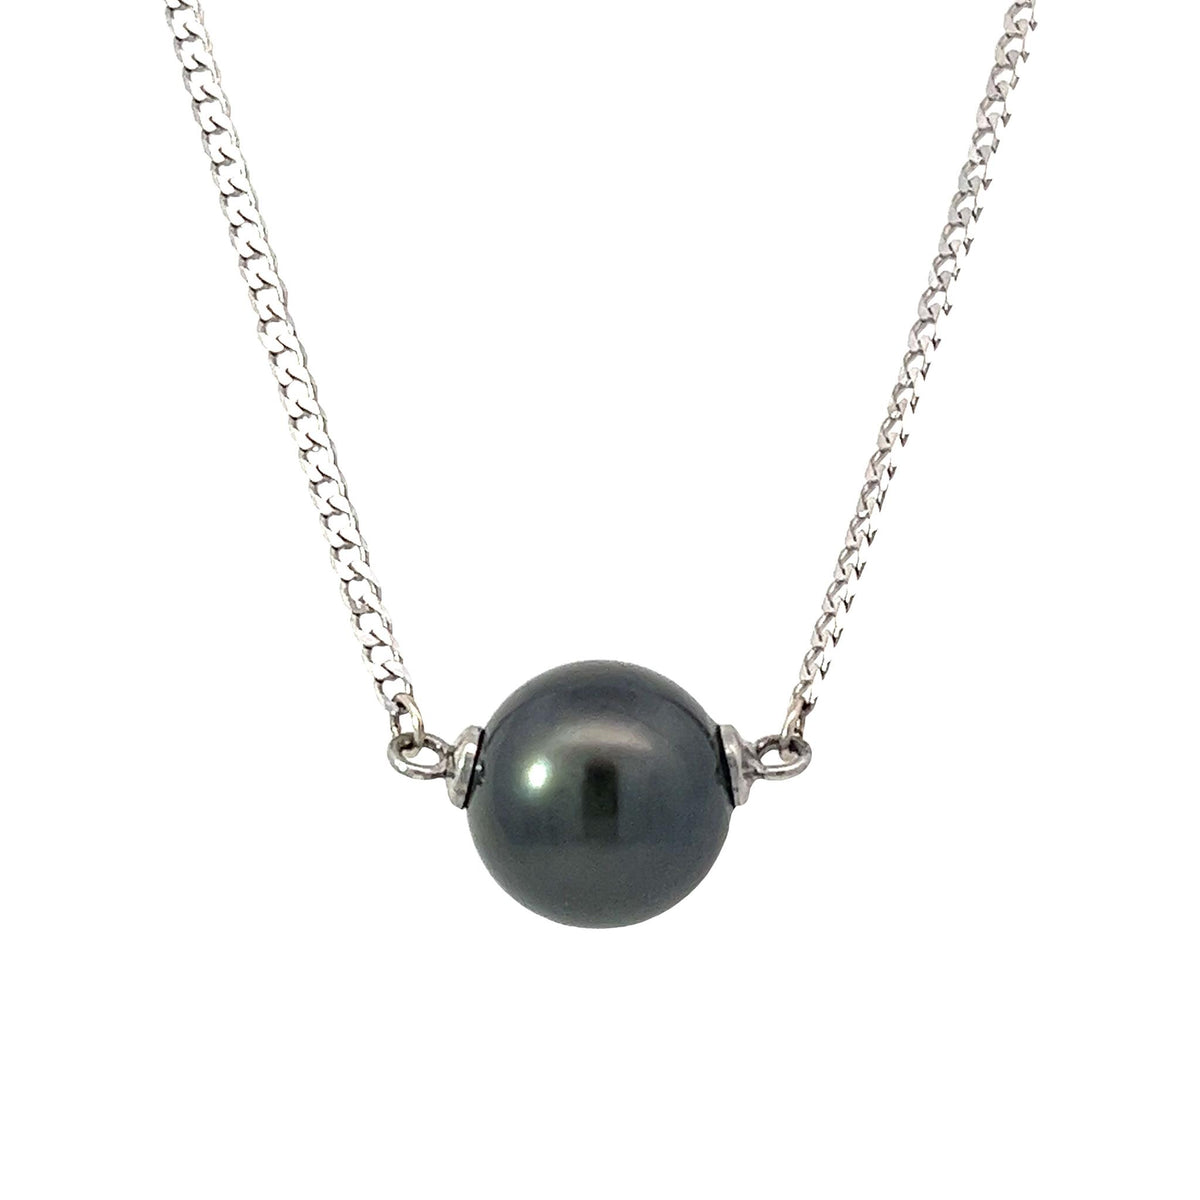 14Kt White Gold Stationary Solitaire  Pendant With 12 mm Tahitian Cultured Pearl